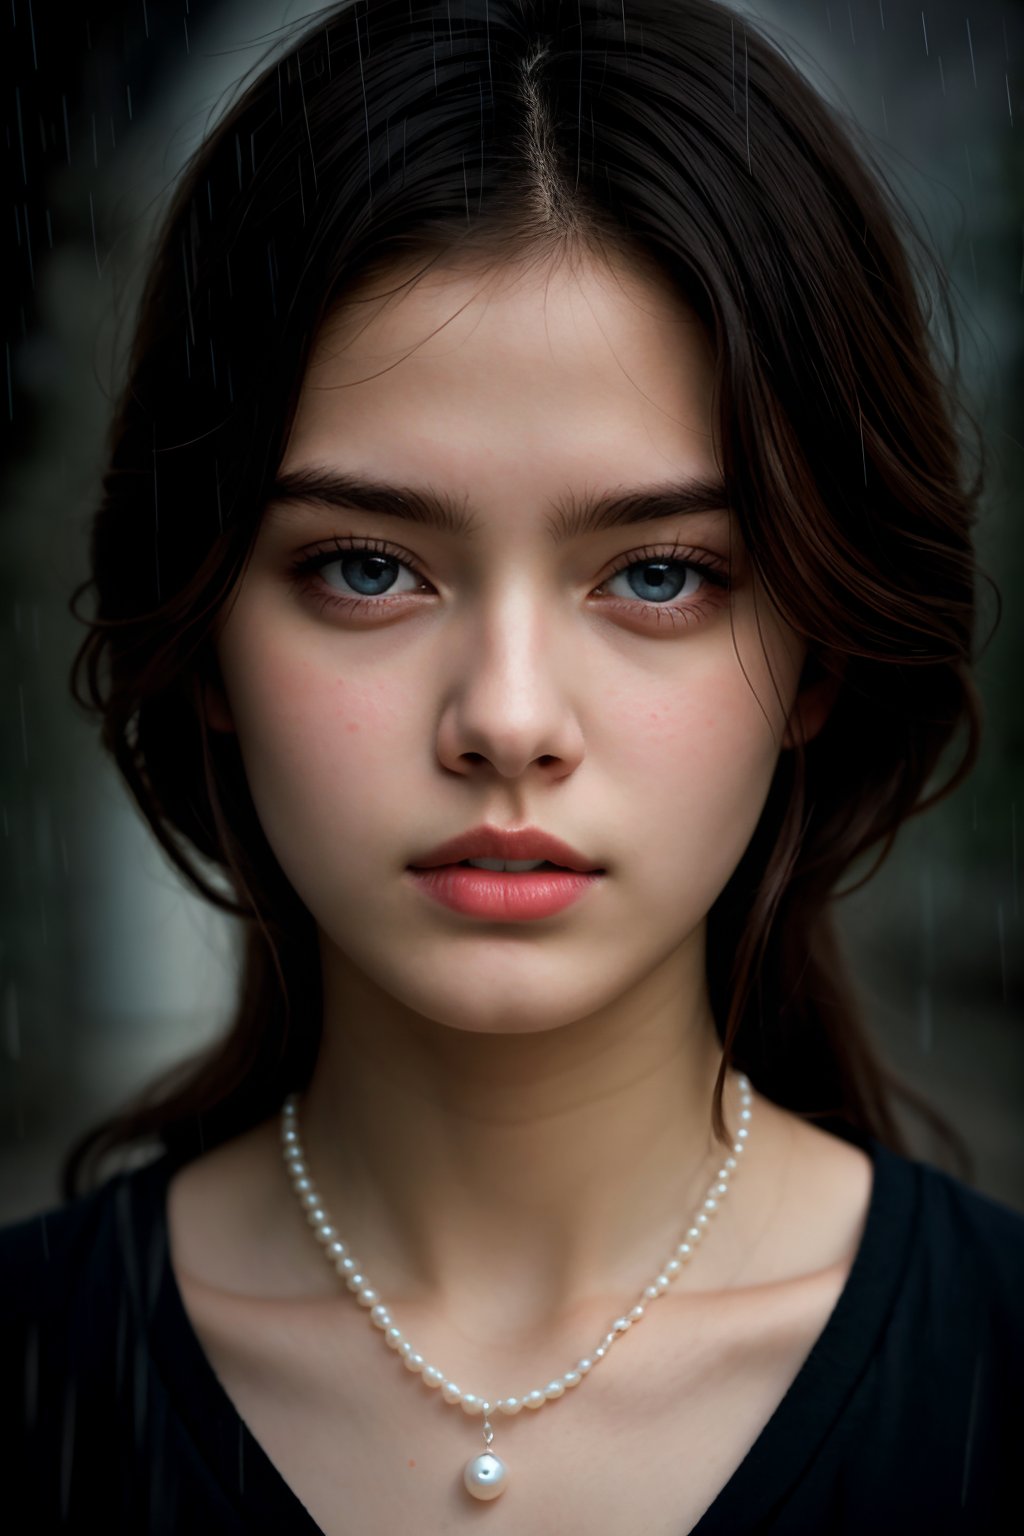 Masterpiece, 18 - year - old beautiful girl, beautiful eyes like pearl, extremely delicate facial depiction, heavy rain, medium shot, exaggerated perspective, poster, androgyny, fashion, dramatic lighting, strong tones, 32k UHD